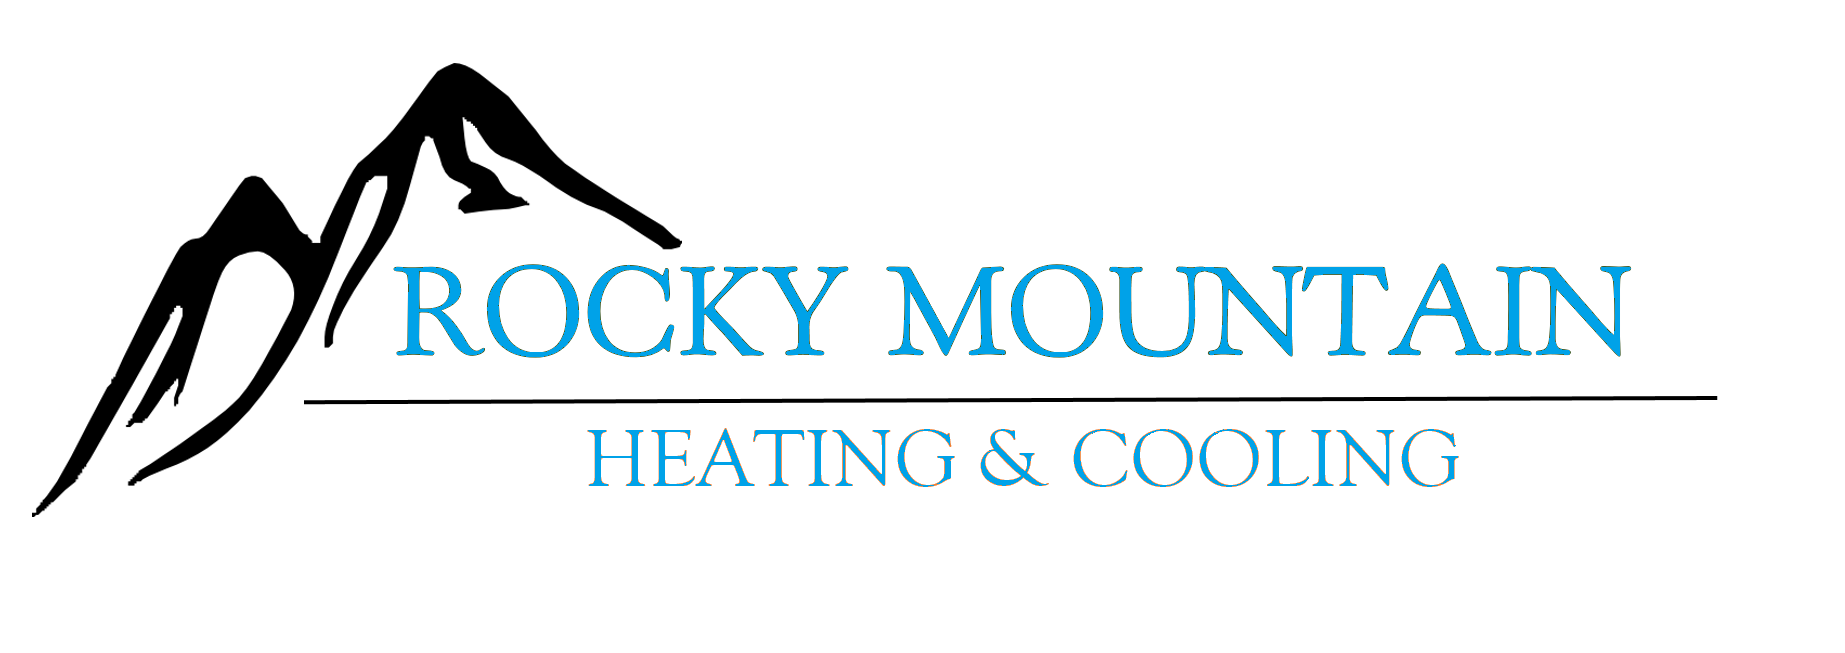 Rocky Mountain Heating and Cooling, Inc. Logo